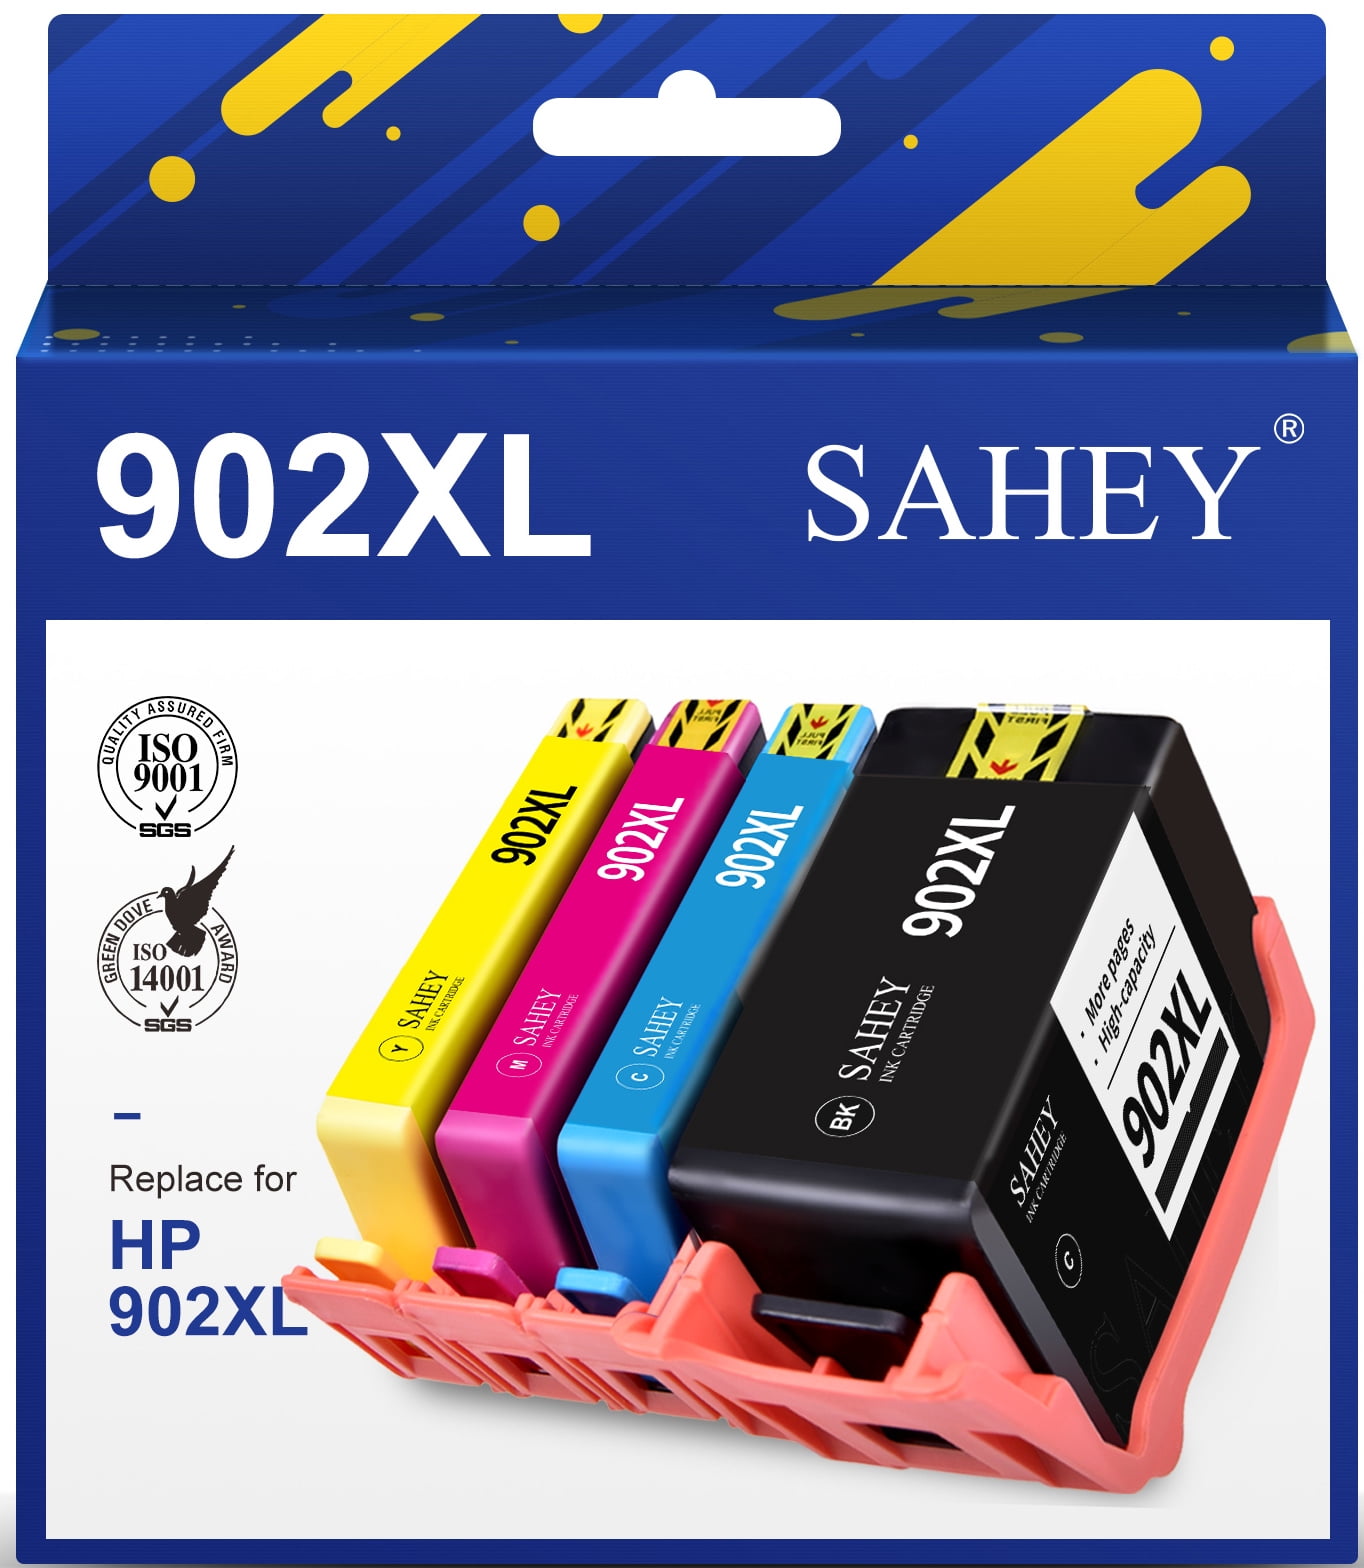 902XL Ink Cartridge for 902 XL HP Ink Cartridges 902 Ink with HP